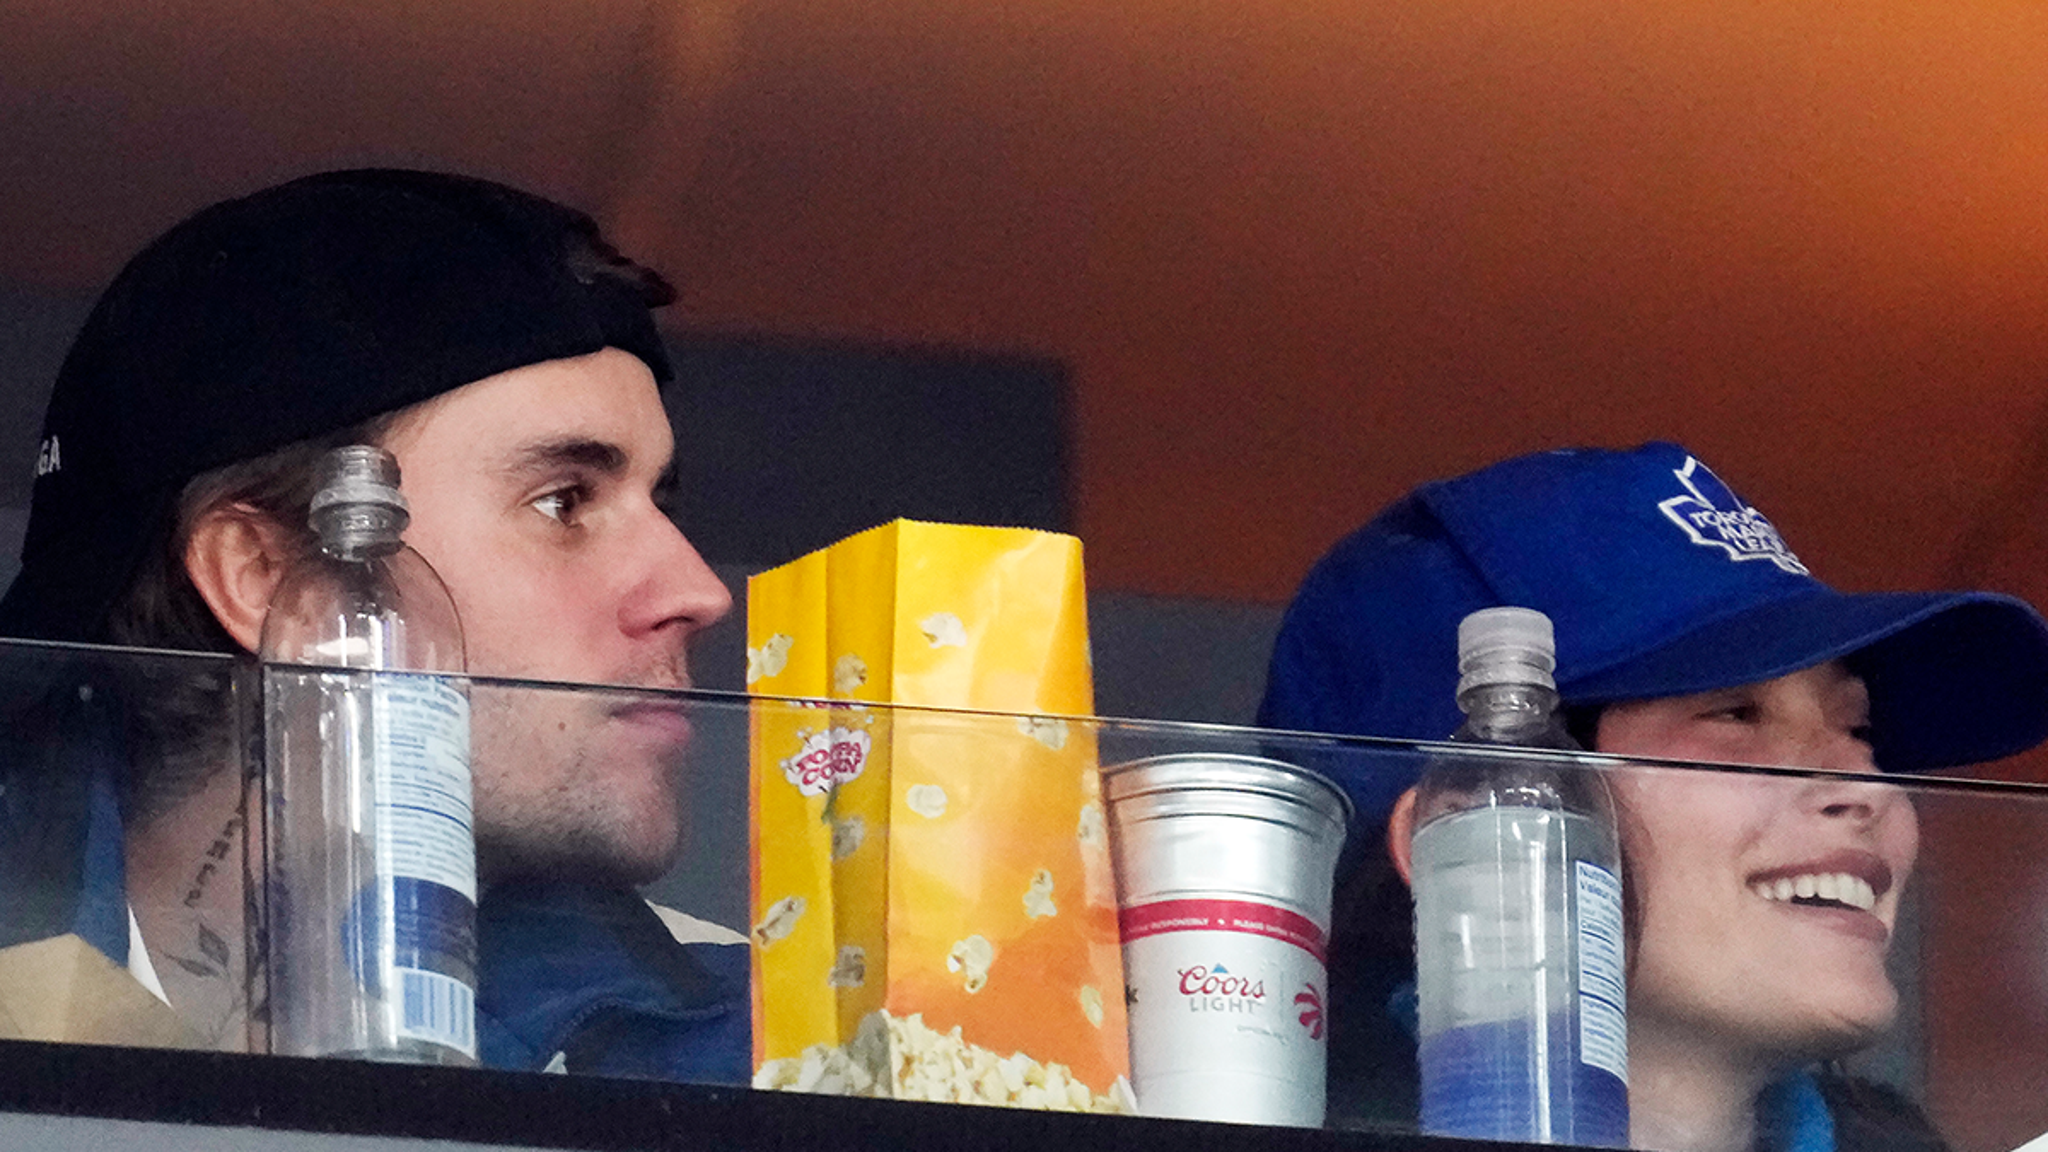 Justin Bieber Hits Maple Leafs Game With Hailey, Gets Huge Ovation #JustinBieber